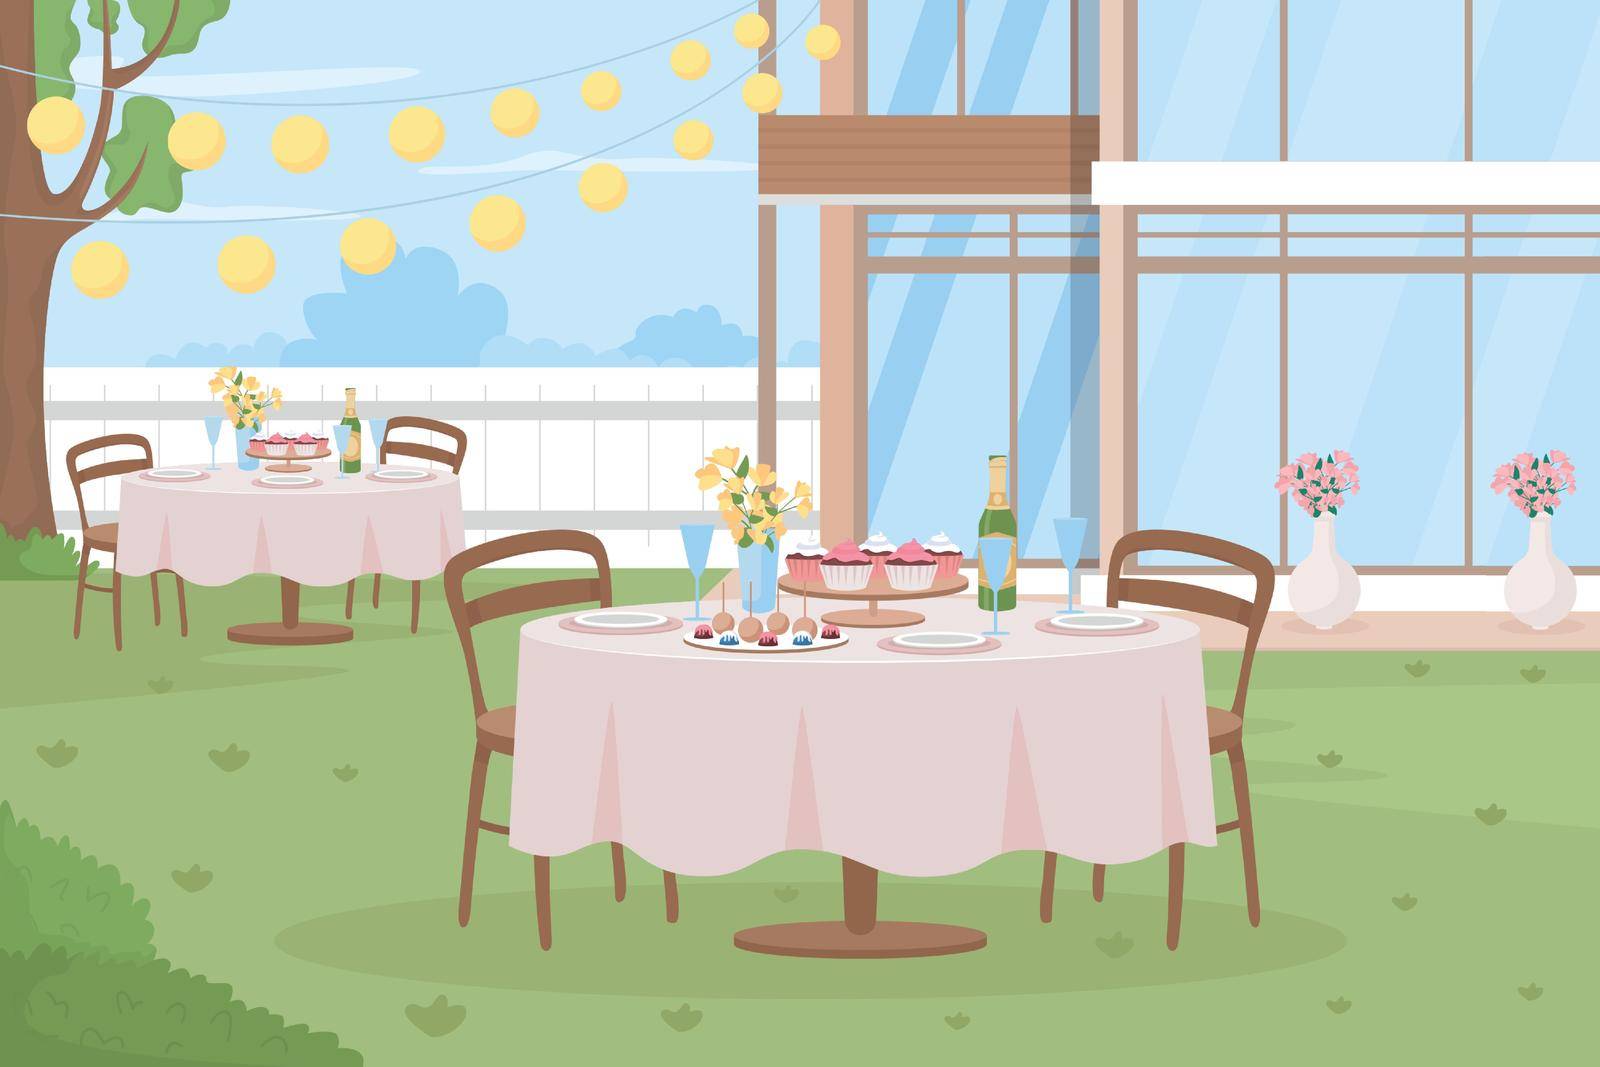 Outdoor formal occasion flat color vector illustration. Wedding day celebration. Birthday party. Summertime backyard partying. 2D simple cartoon landscape with decorations on background